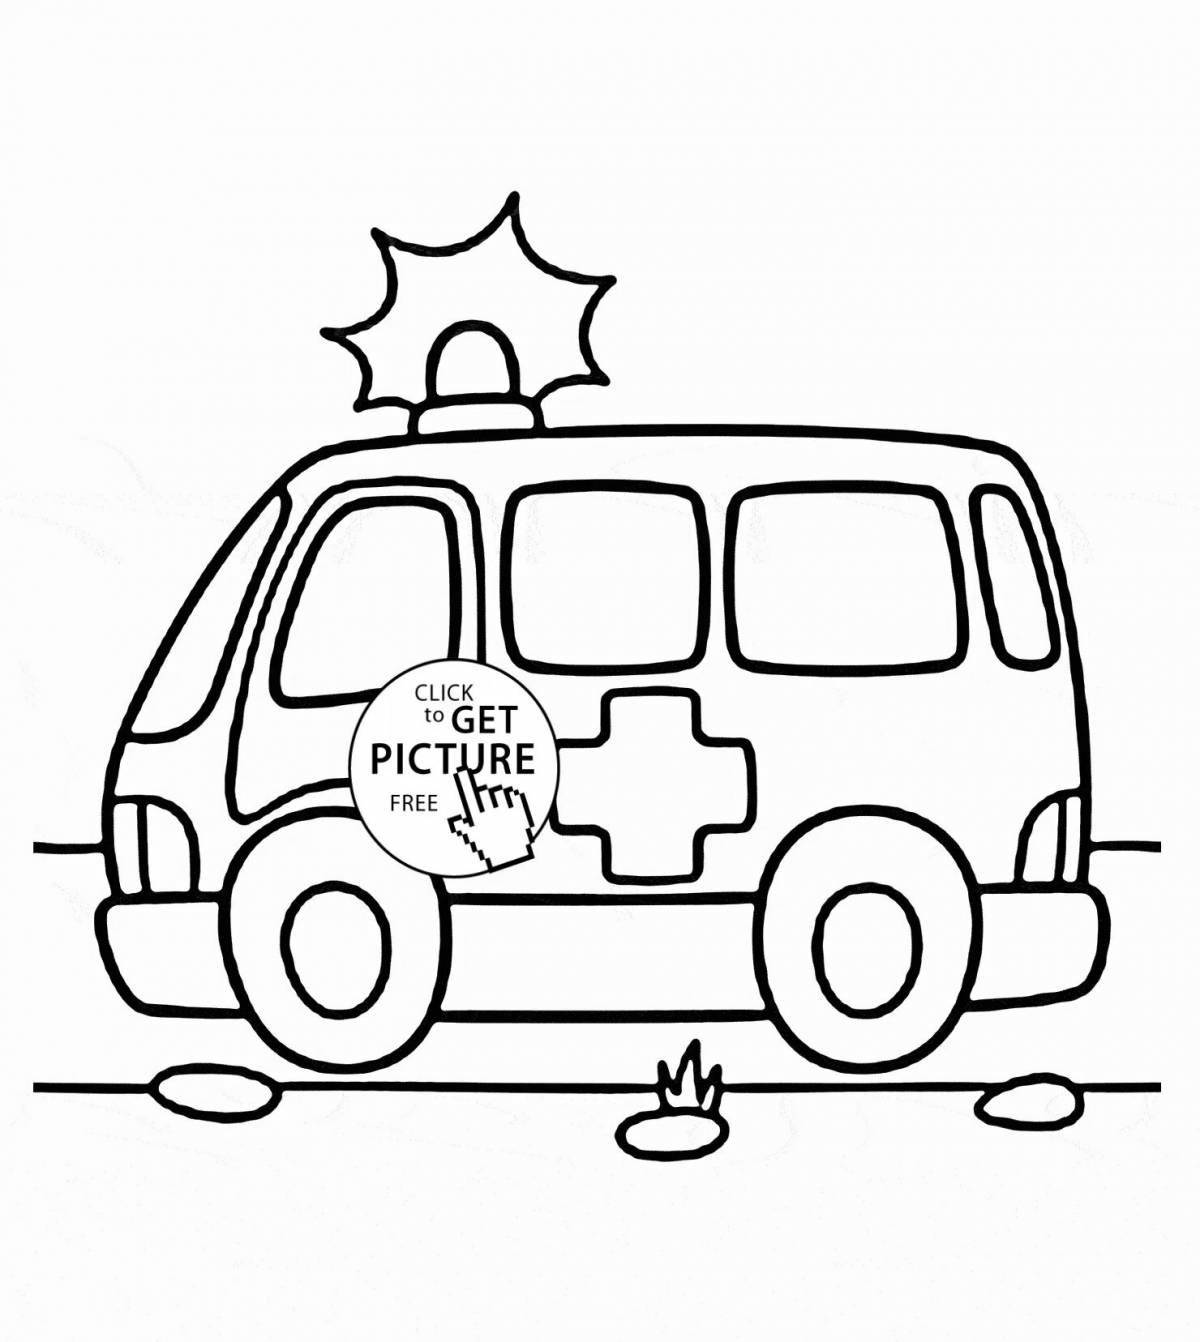 Fabulous Special Purpose Vehicle Coloring Page